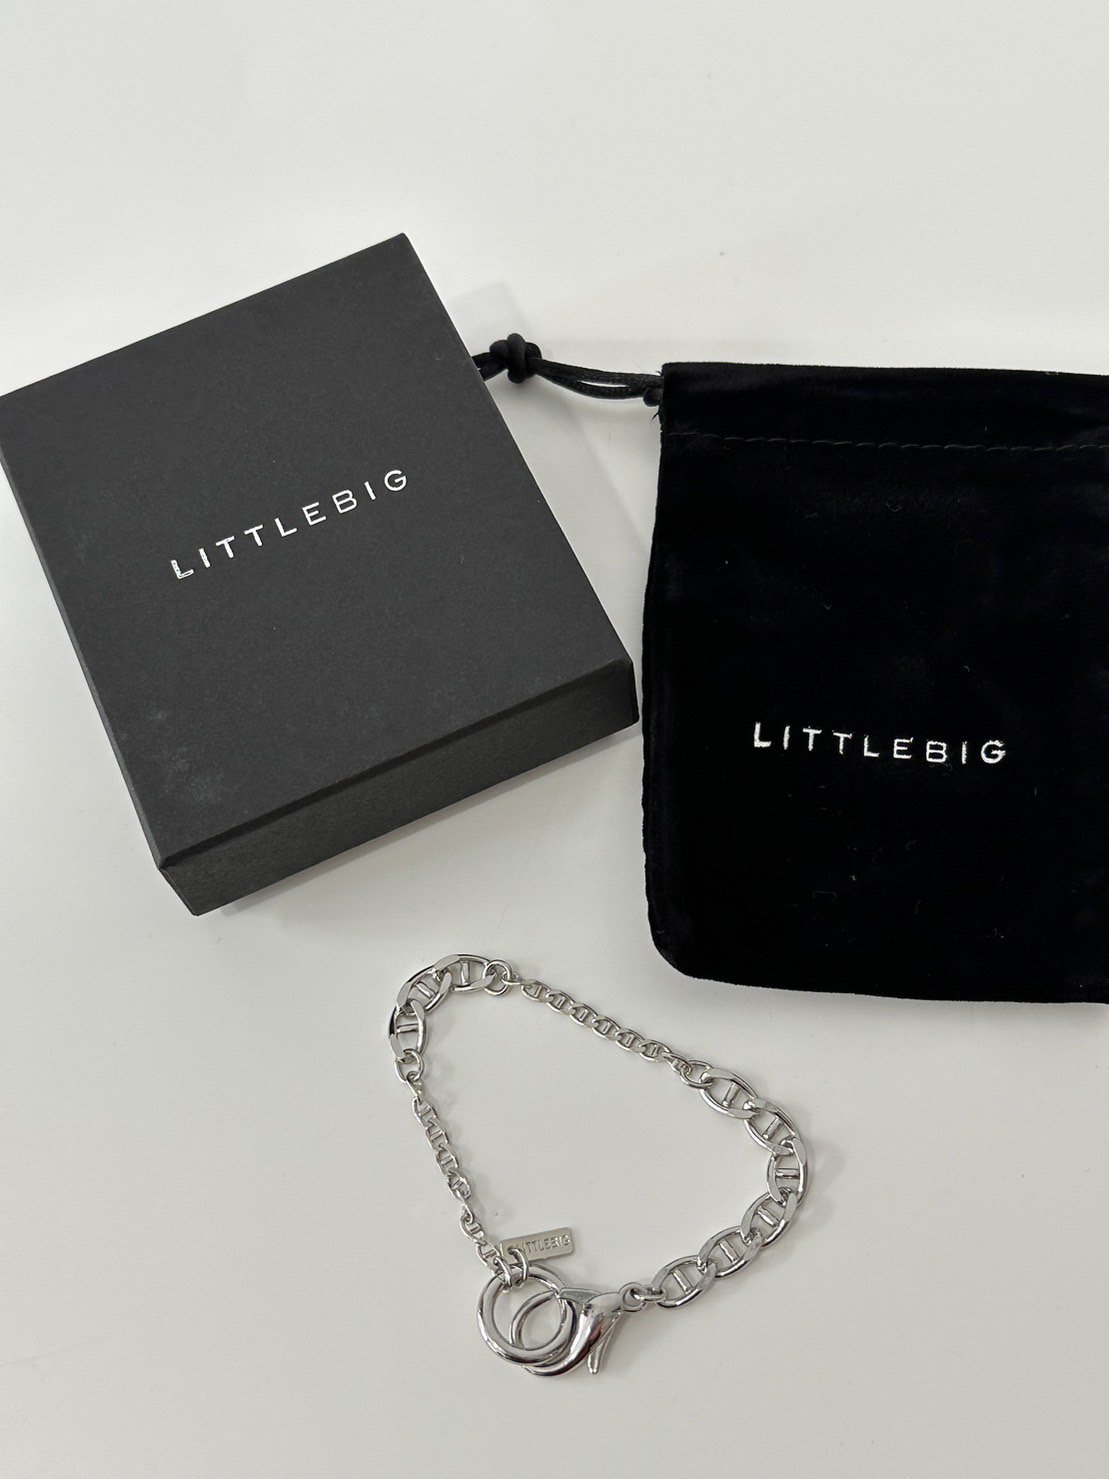 LITTLEBIG<br />Chain Bracelet 1 / Silver<img class='new_mark_img2' src='https://img.shop-pro.jp/img/new/icons14.gif' style='border:none;display:inline;margin:0px;padding:0px;width:auto;' />